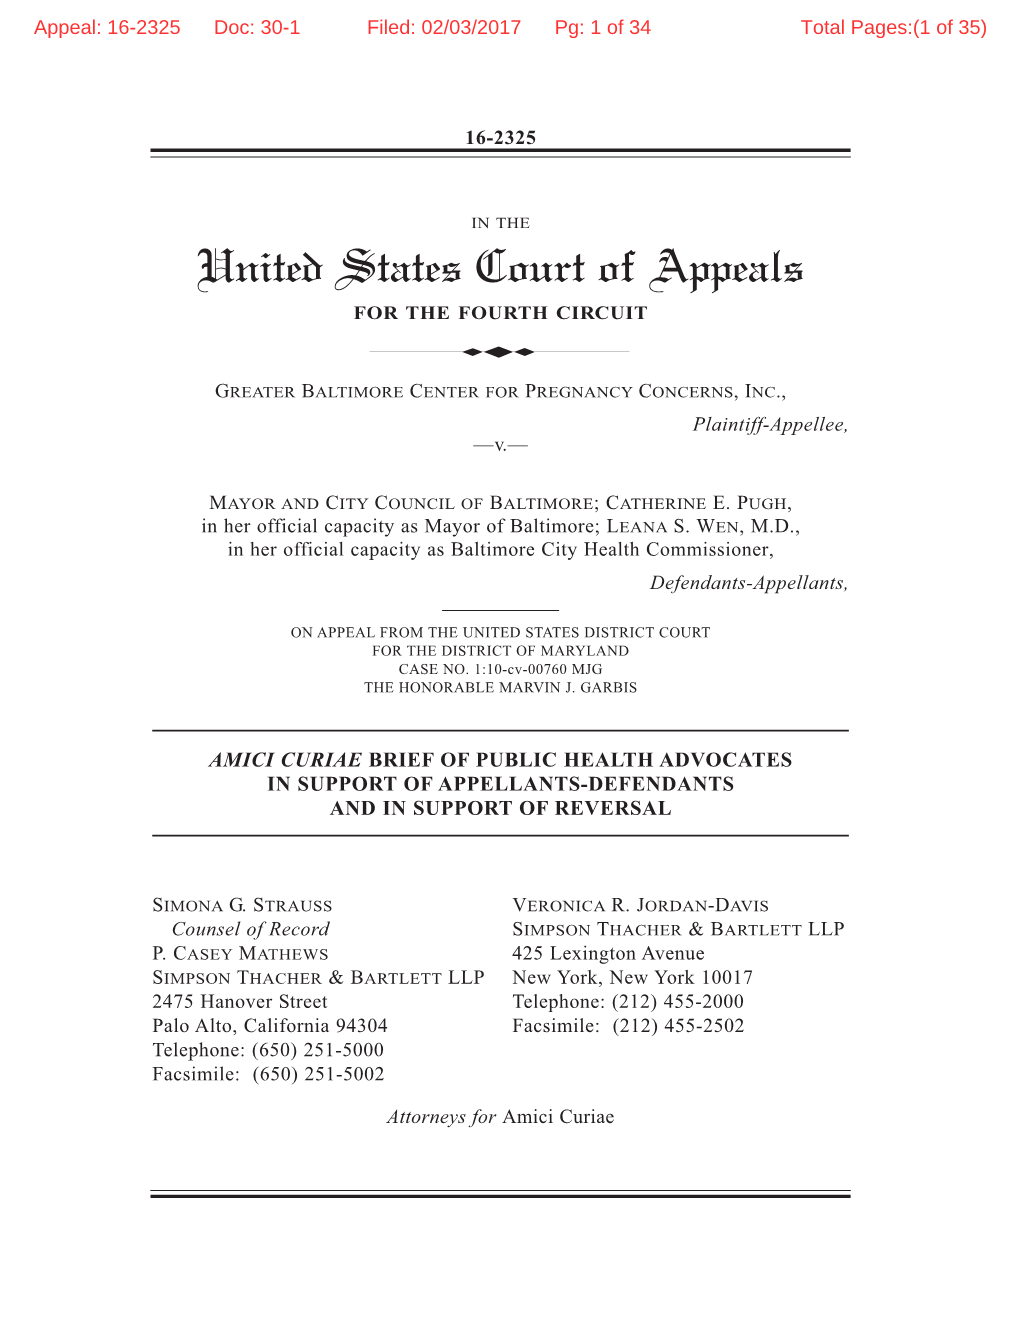 United States Court of Appeals                    NN